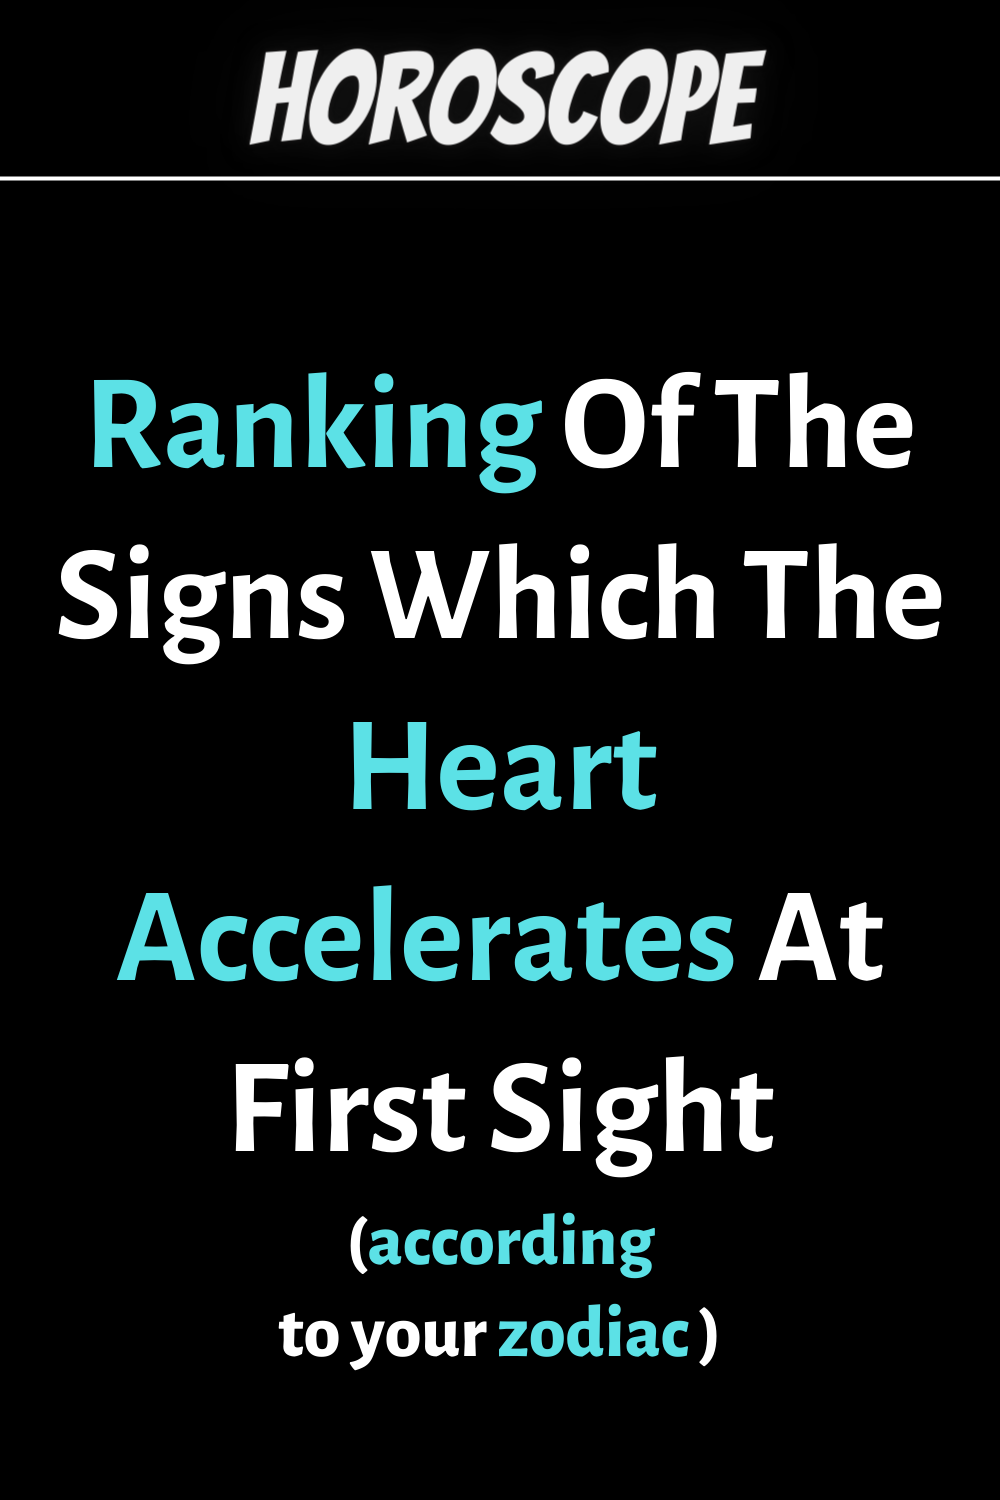 Ranking Of The Signs Which The Heart Accelerates At First Sight